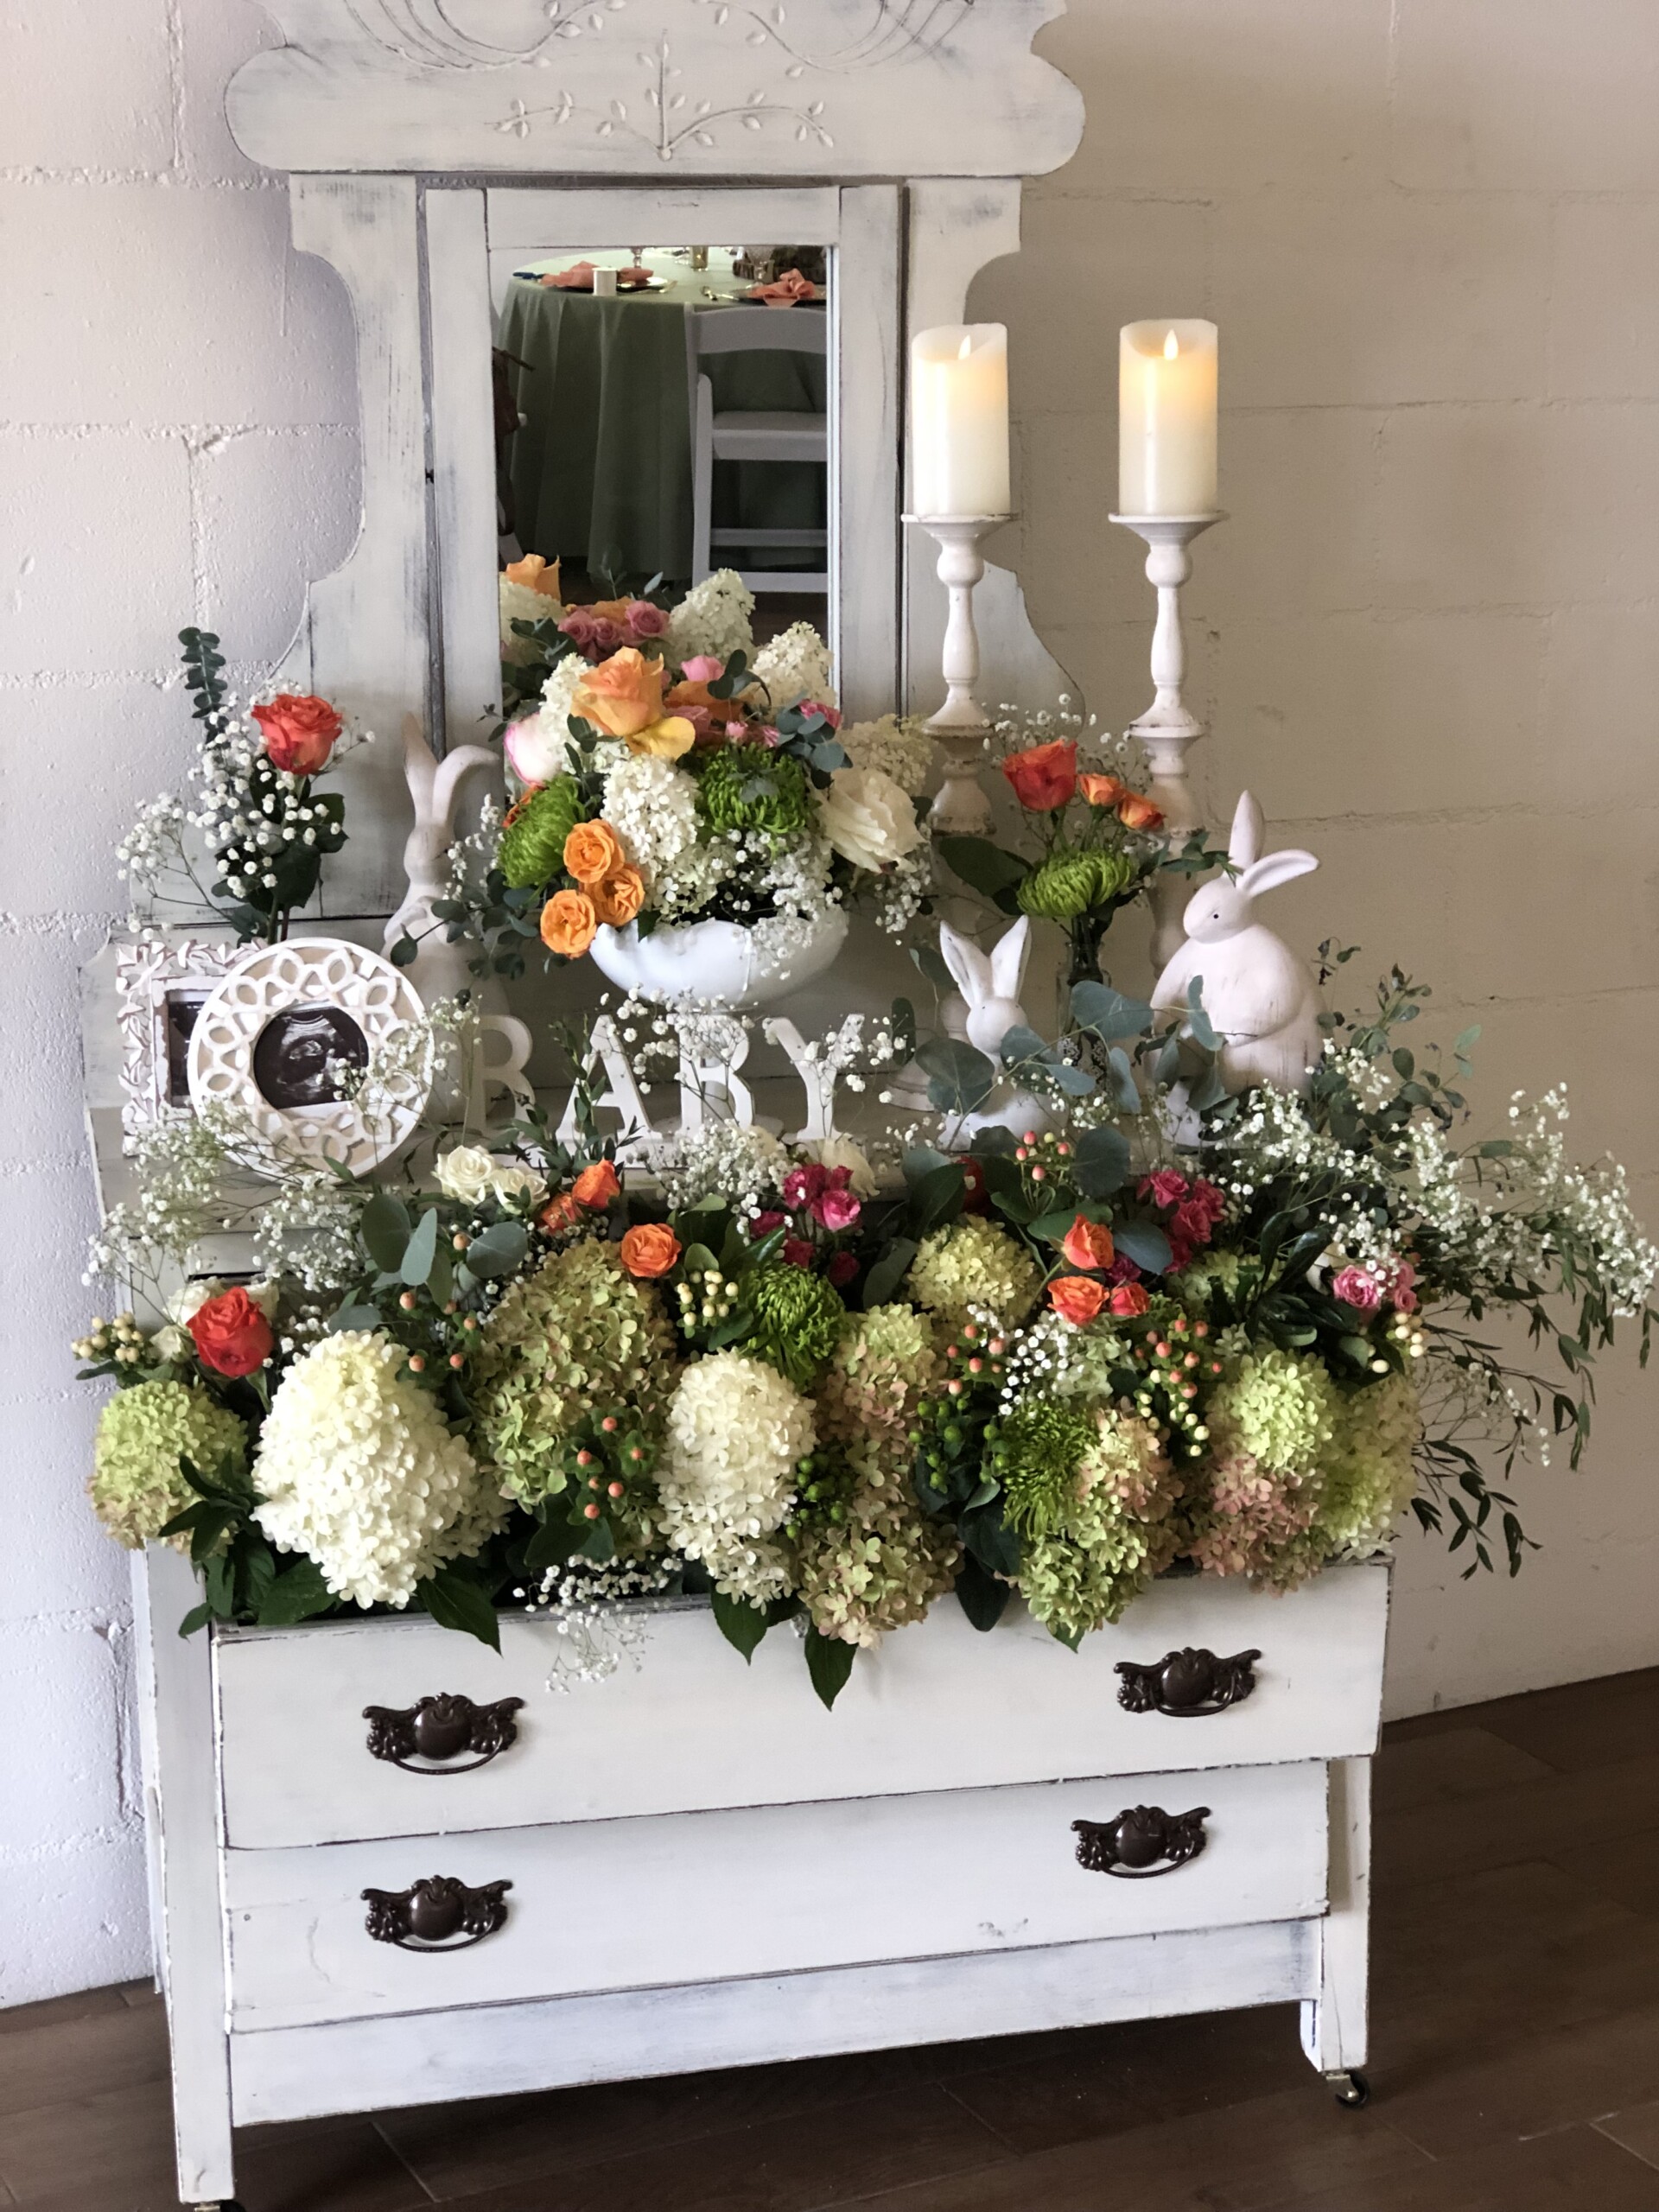 Garden Inspired Baby Shower at The Robertson Room